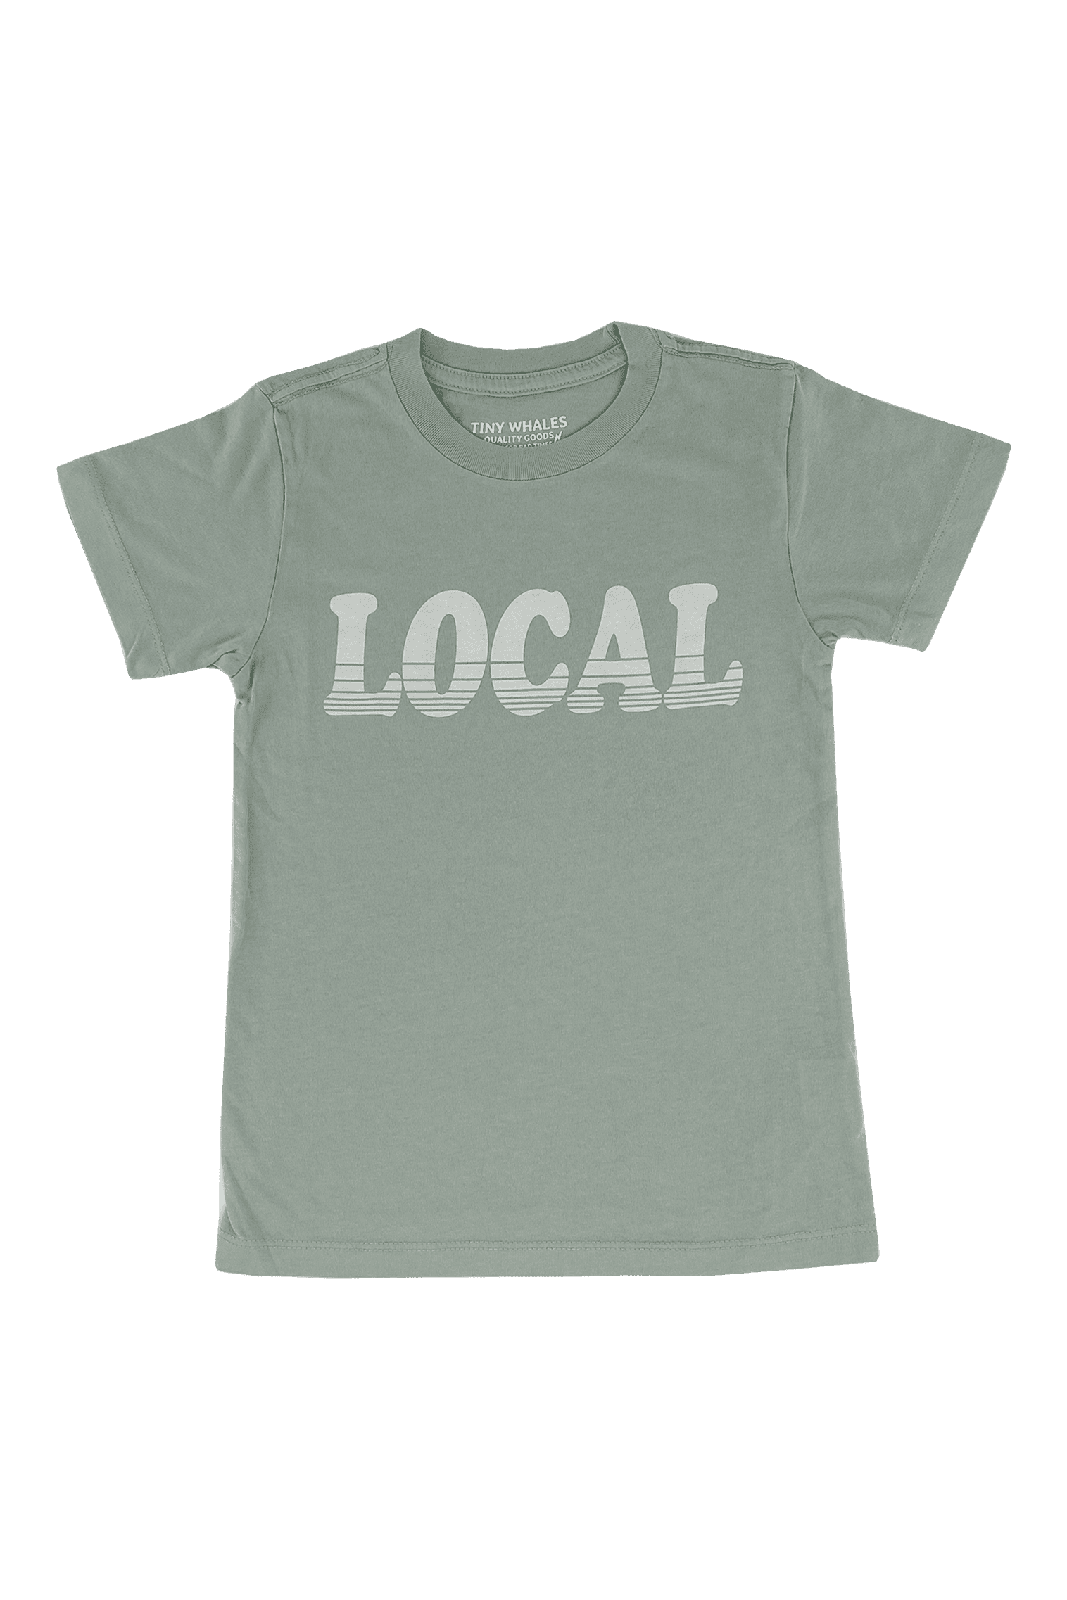 Local Tee Tea for Three: A Children's Boutique